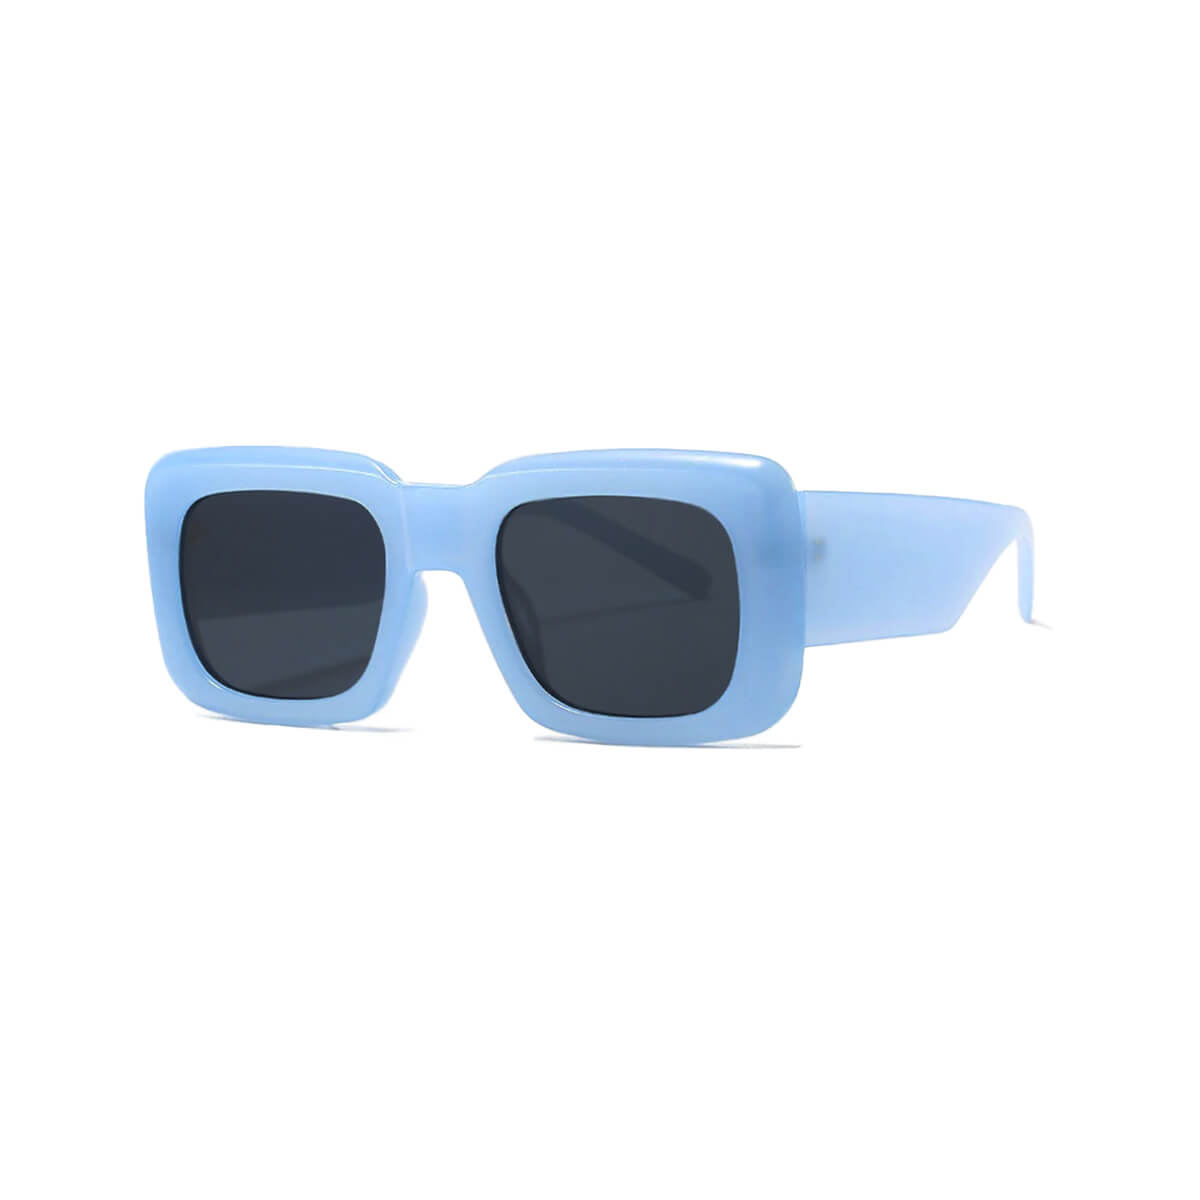 LKEYE 2-Pack Unique Oversize Sunglasses Shield Vintage Square Glasses  LK1705 C22 2 Pieces Gray & Blue : Buy Online at Best Price in KSA - Souq is  now : Fashion